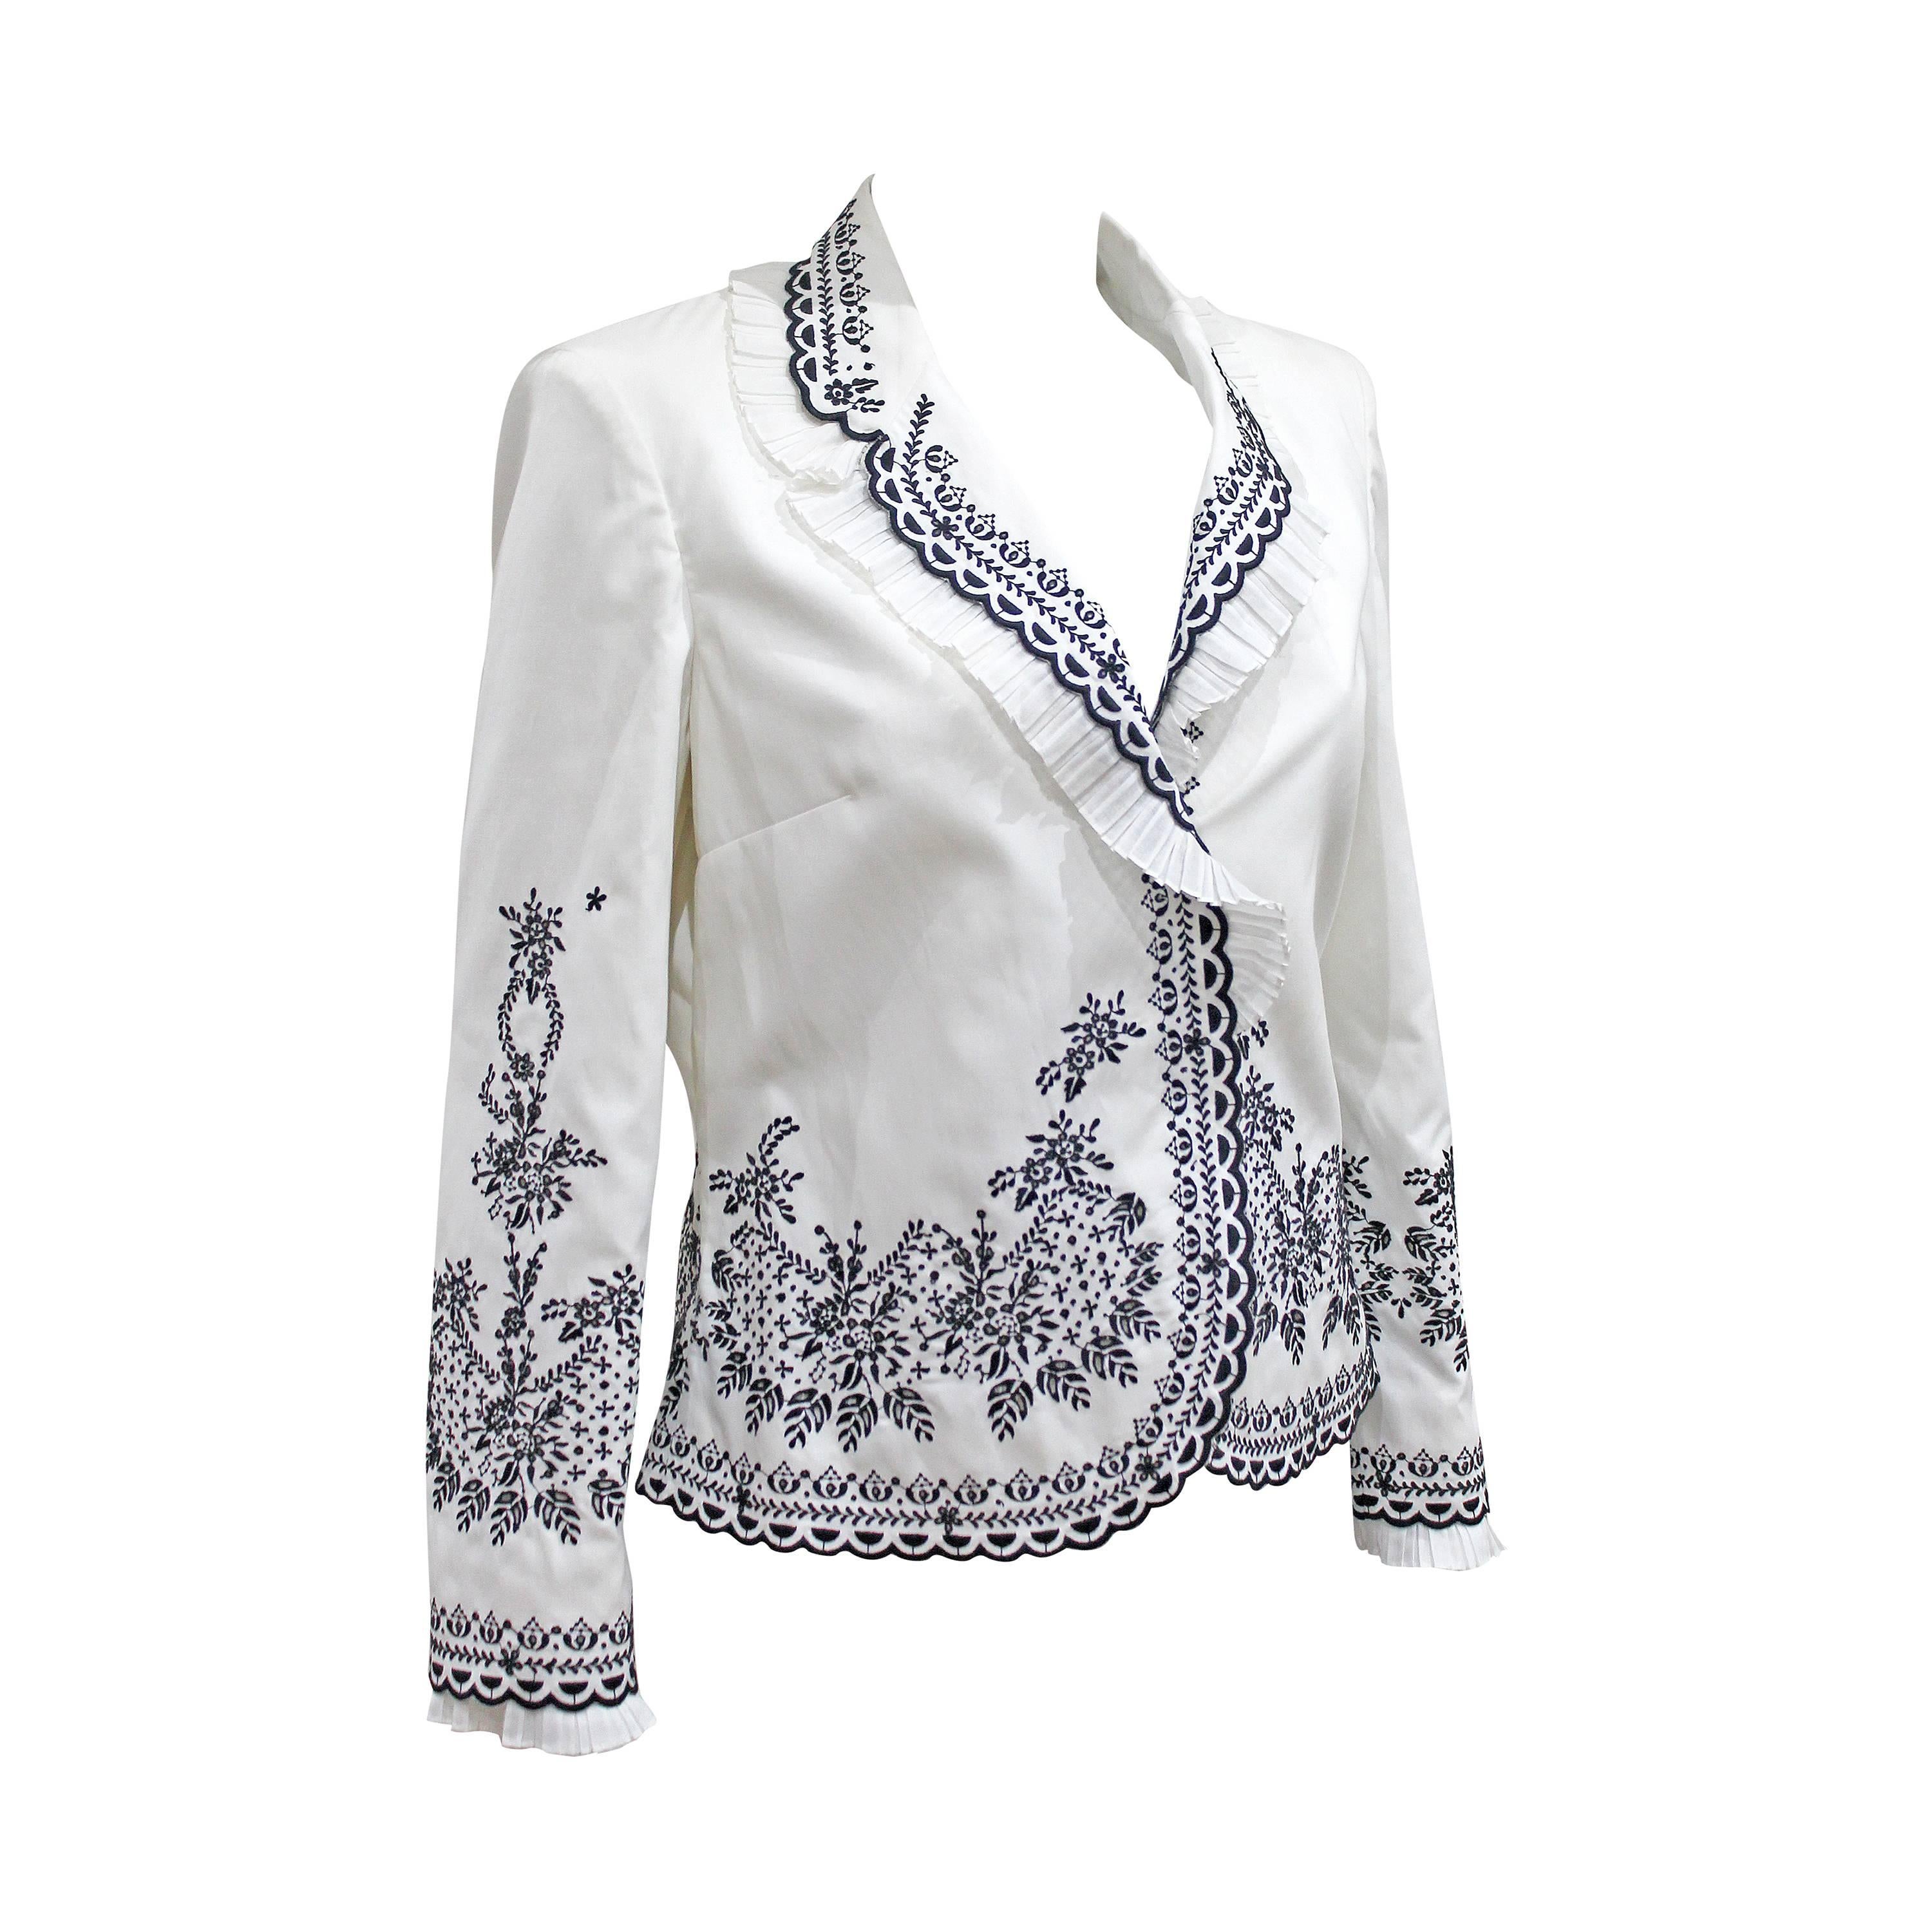 Alexander McQueen embroidered tailored 'Sarabande' jacket, c. 2007 For Sale